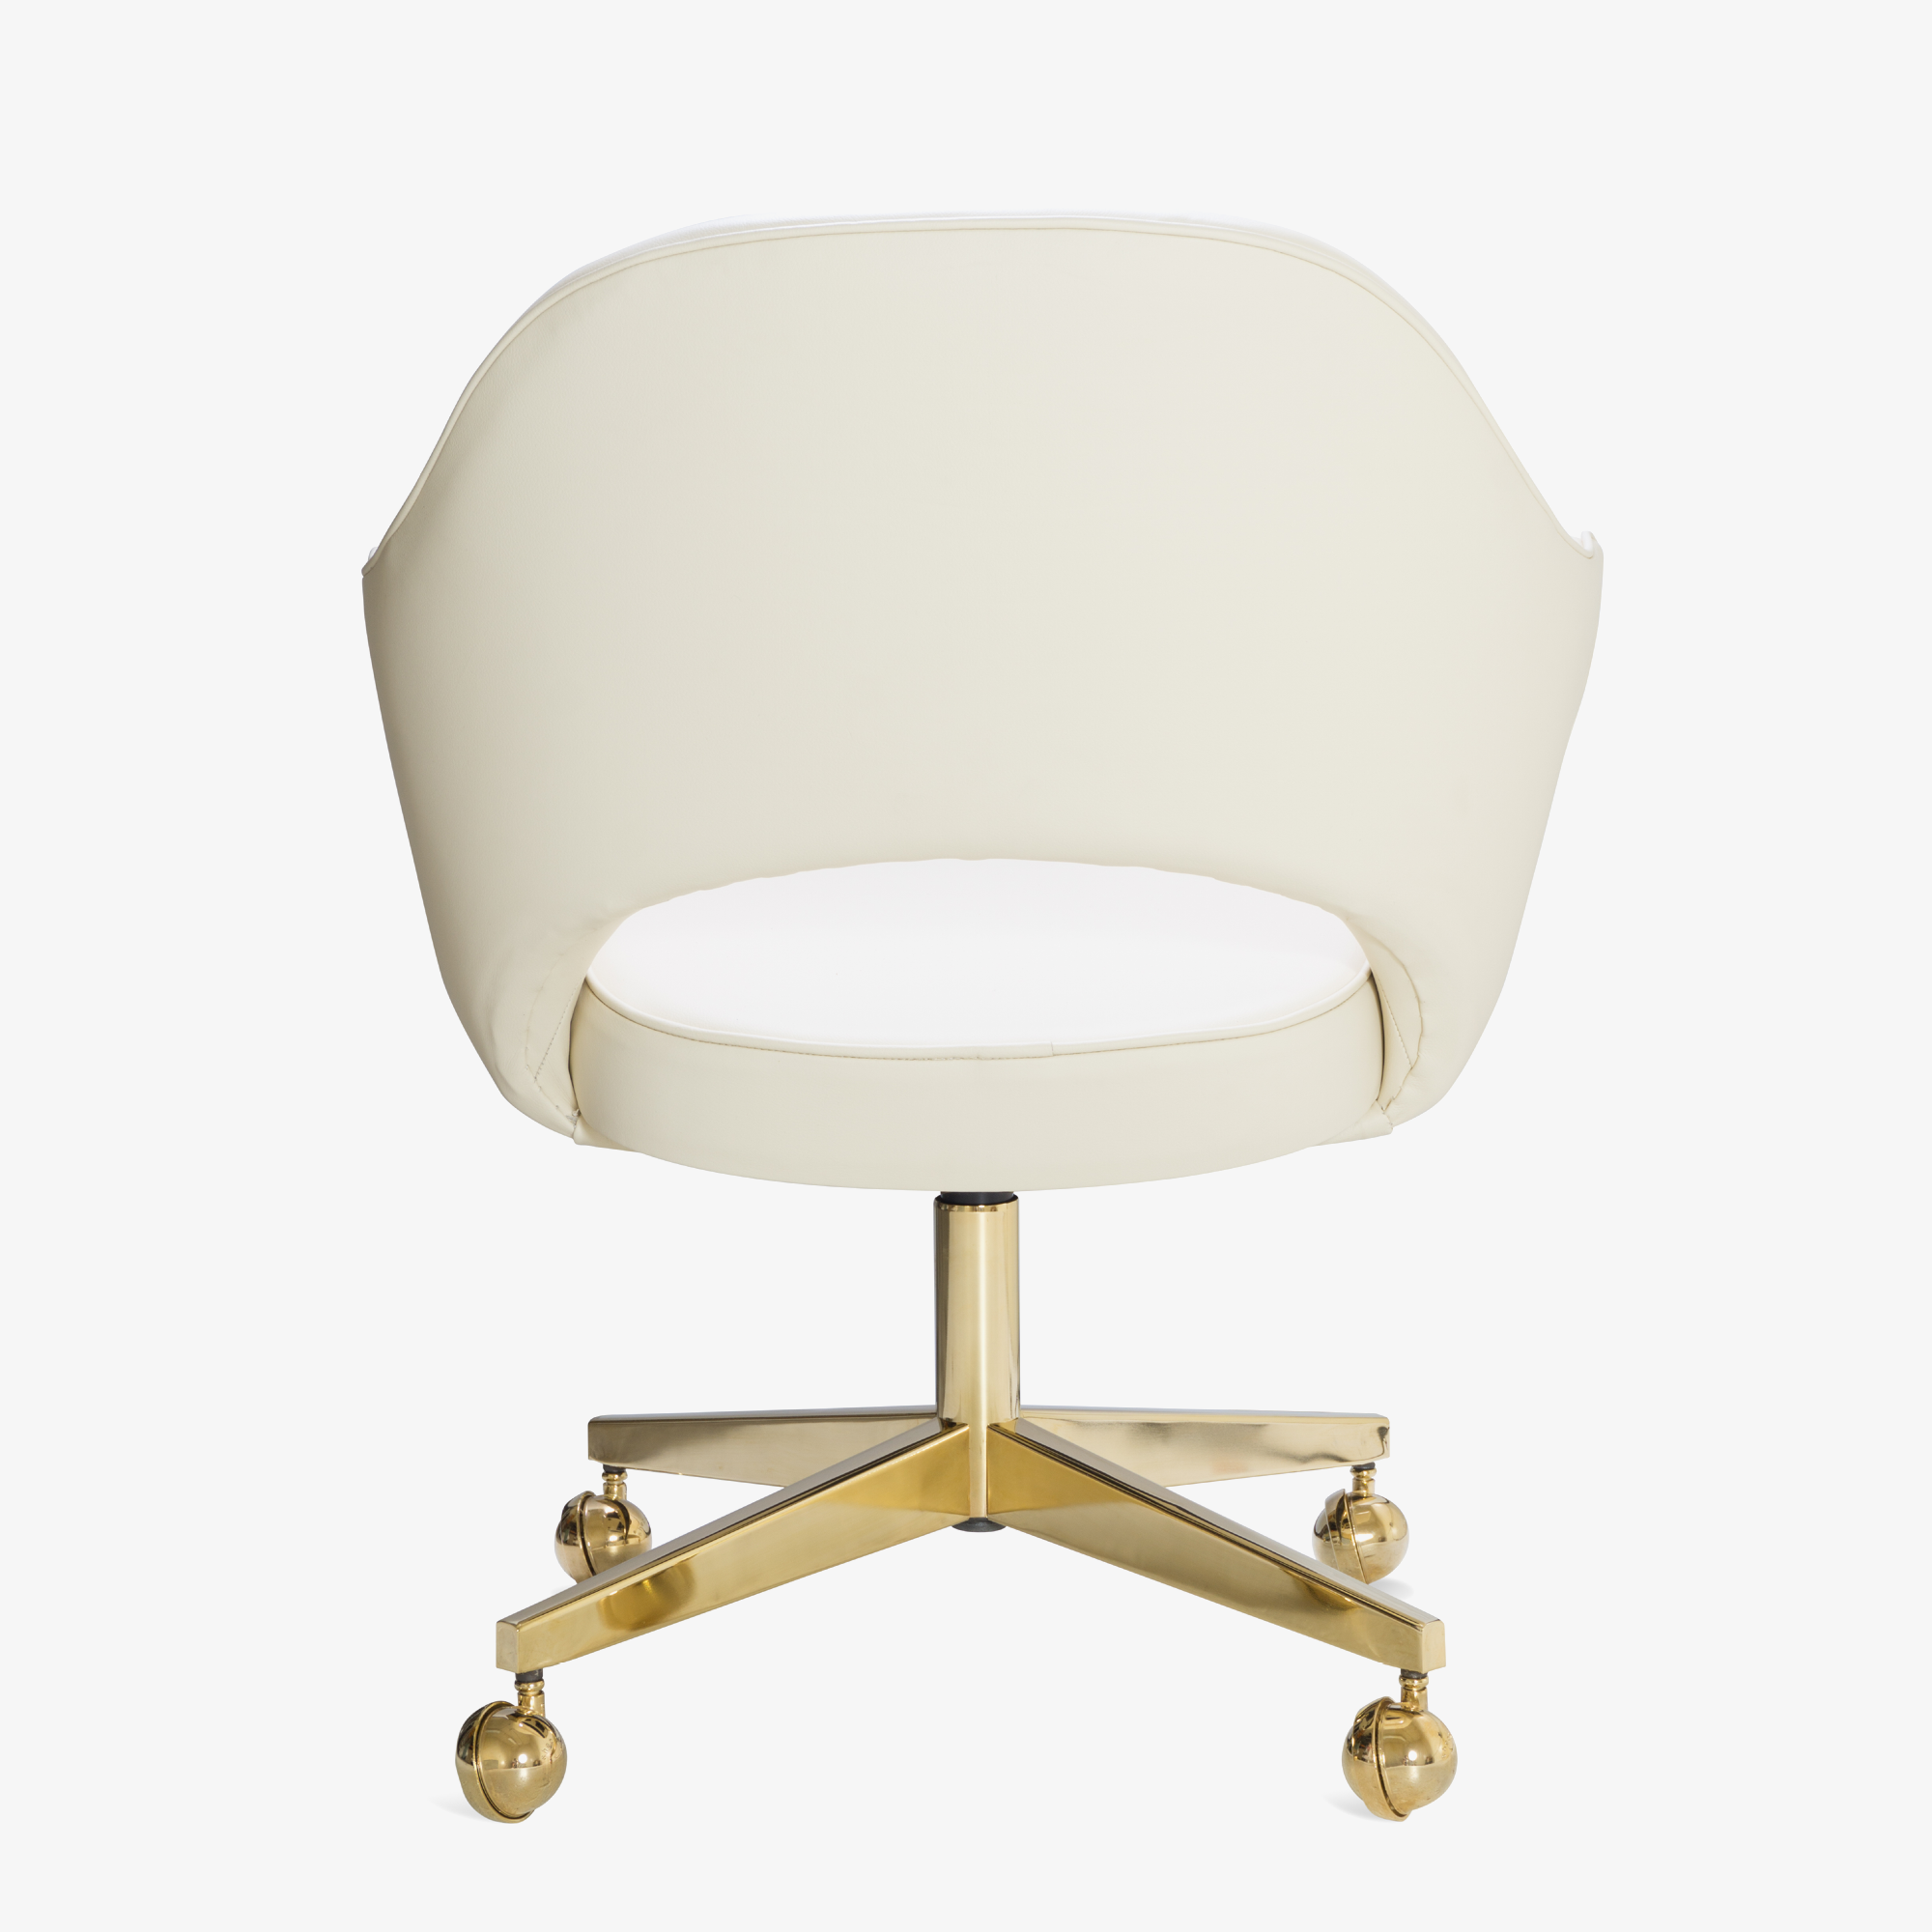 Saarinen Executive Arm Chair in Creme Leather, Swivel Base, 24k Gold Edition5.png